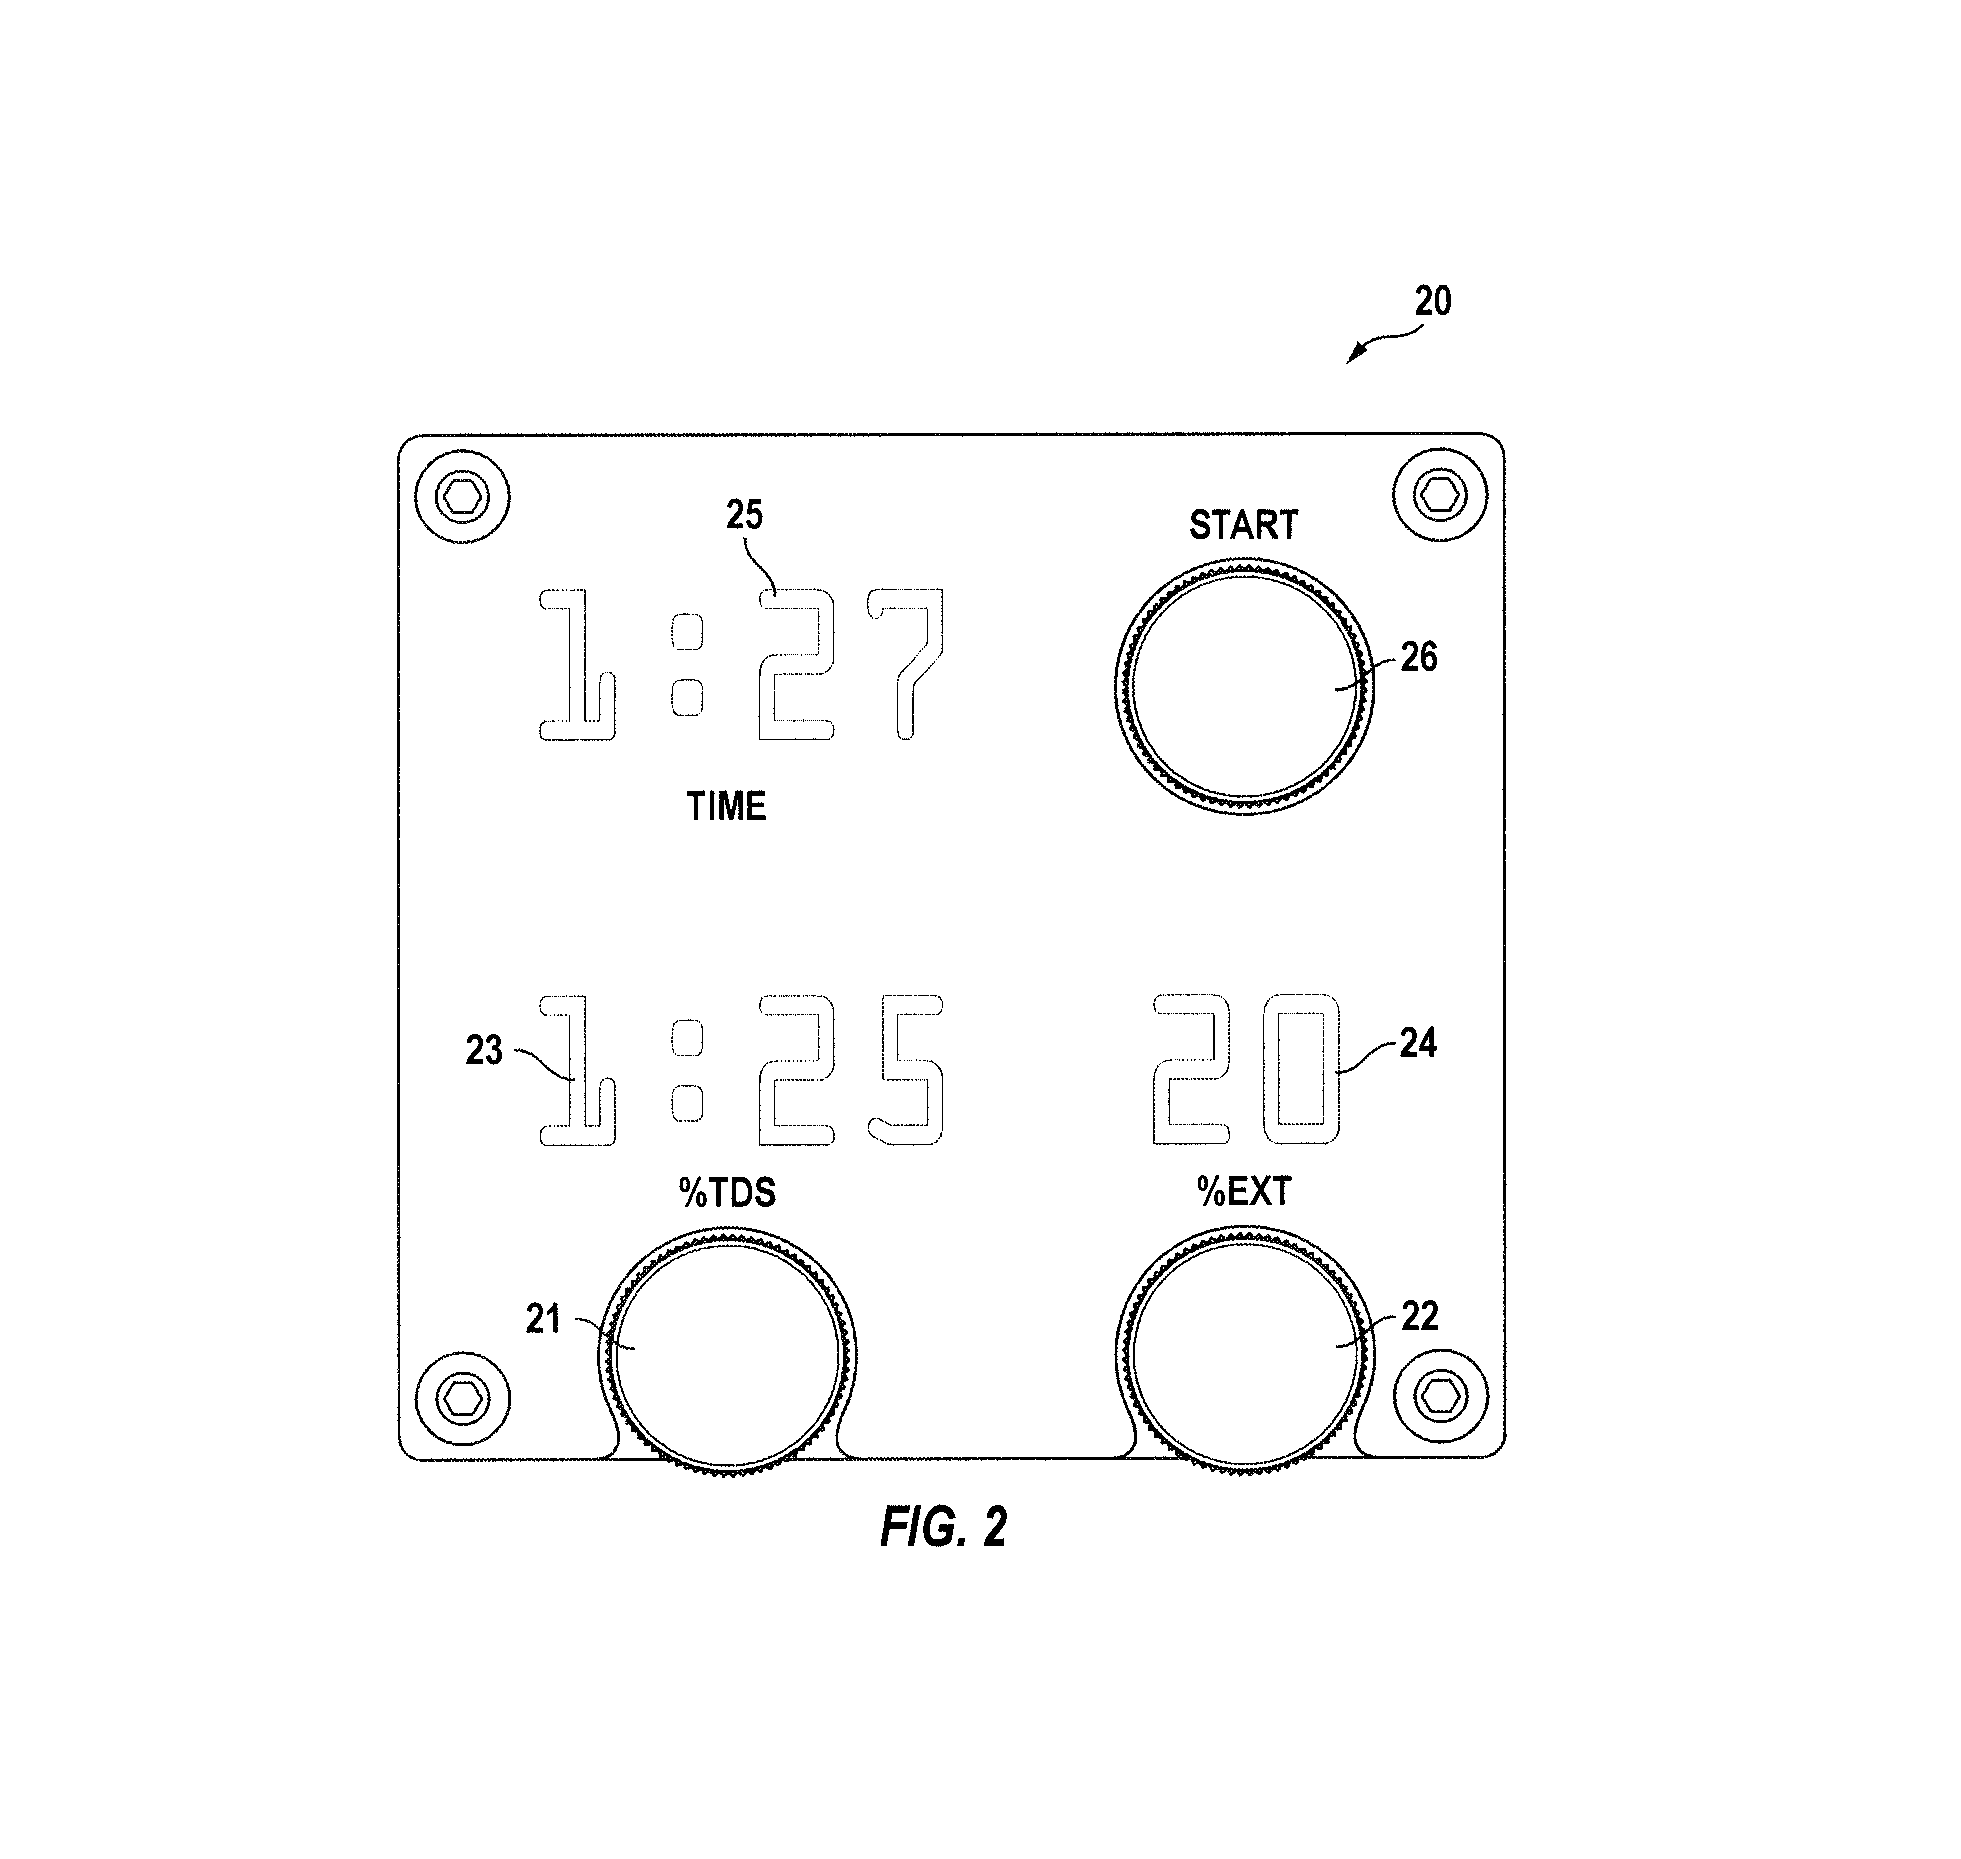 Device for metering coffee brewing